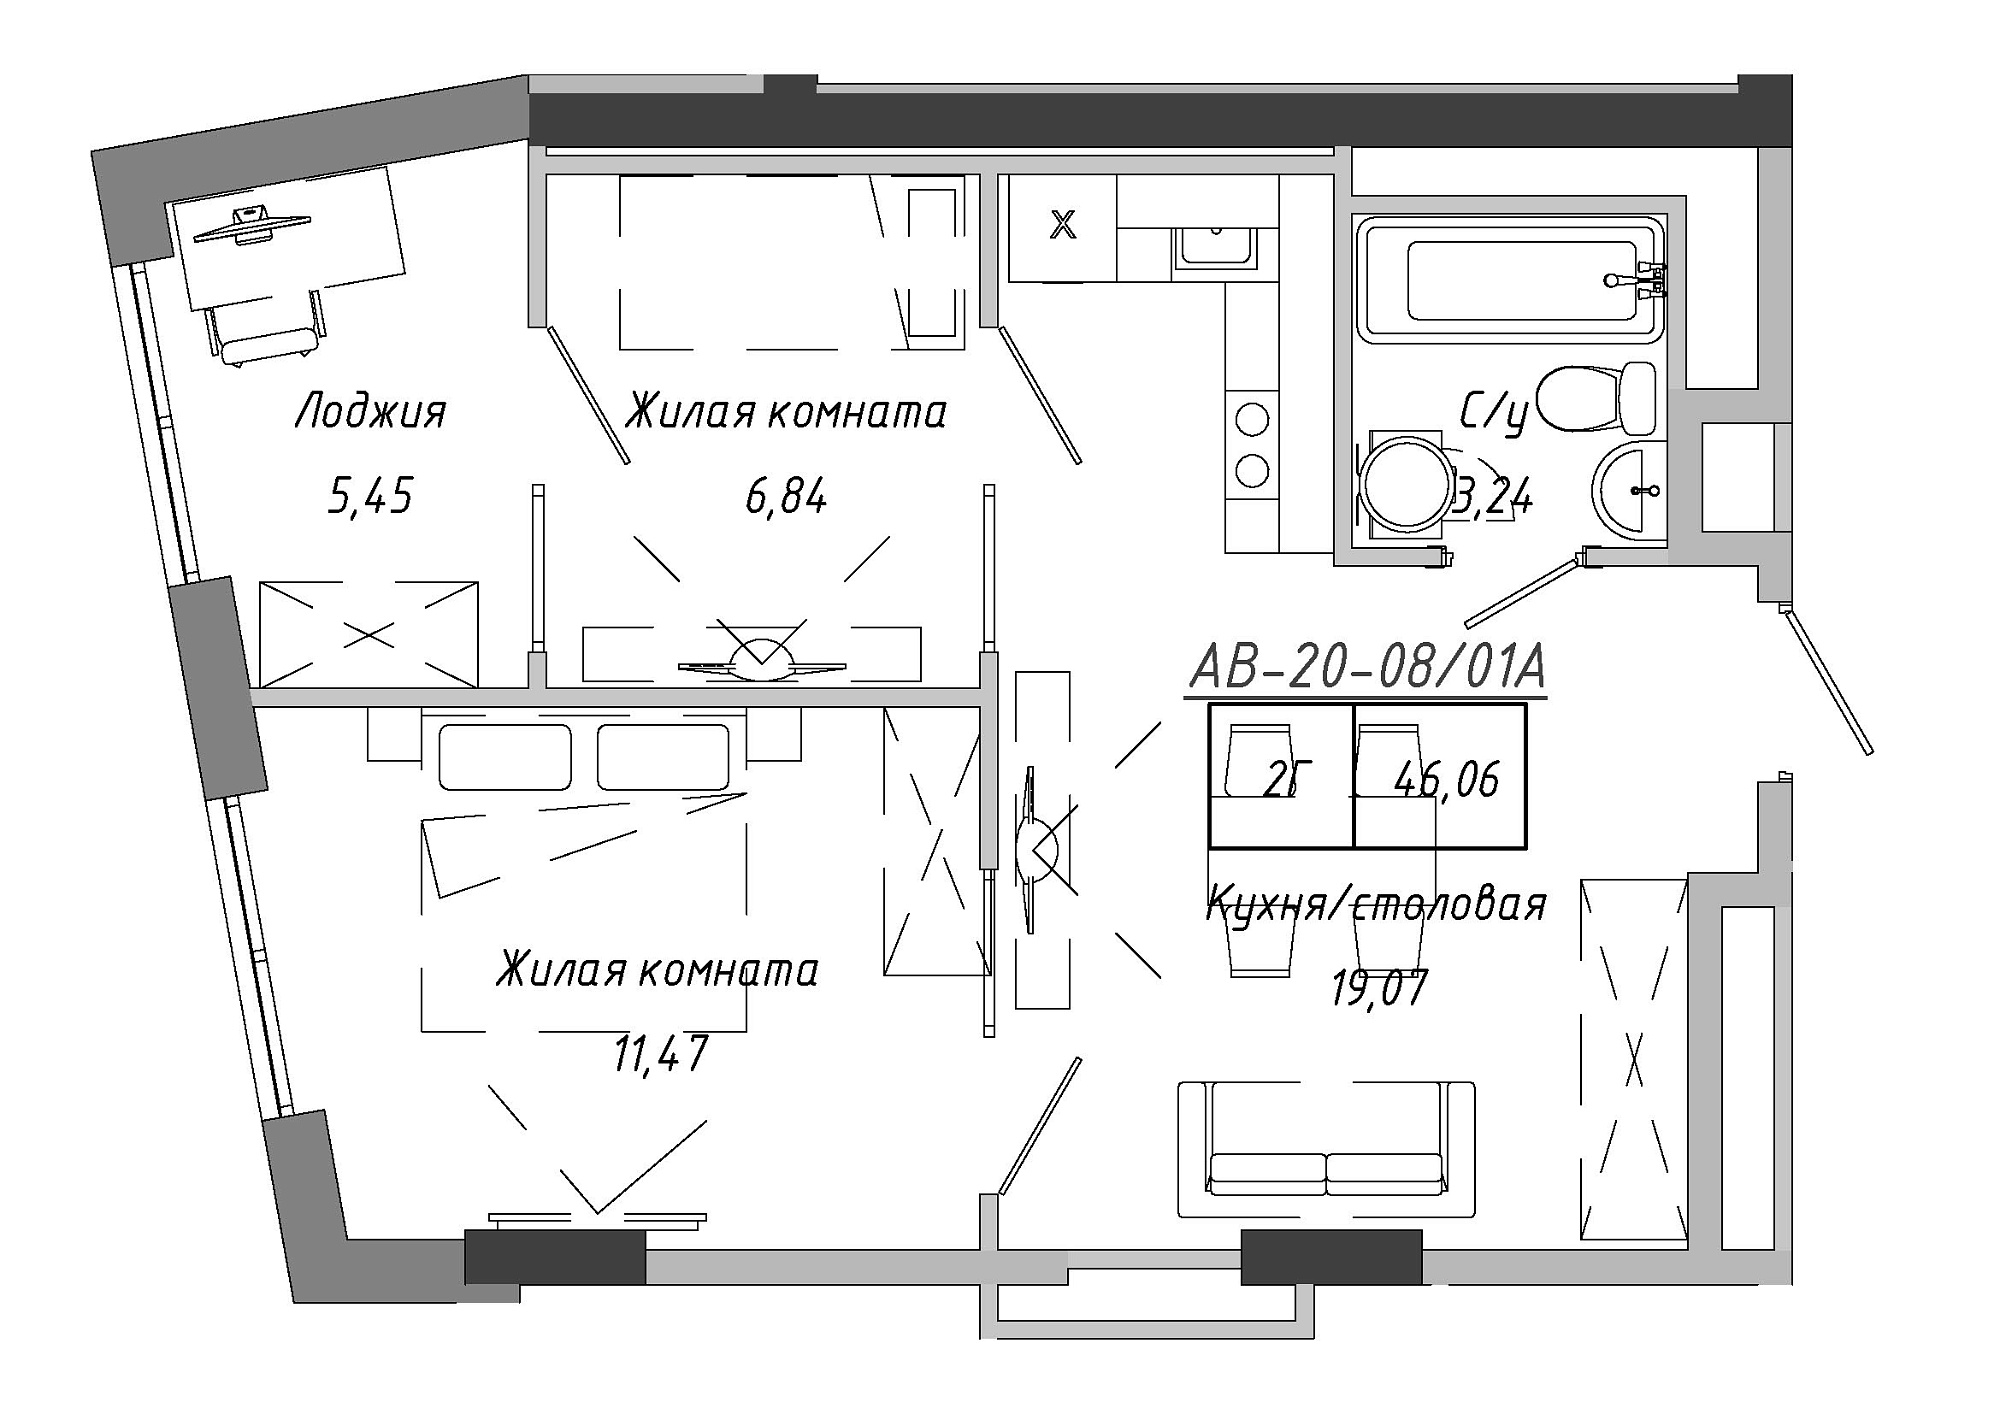 Planning 2-rm flats area 45.99m2, AB-20-08/0001а.